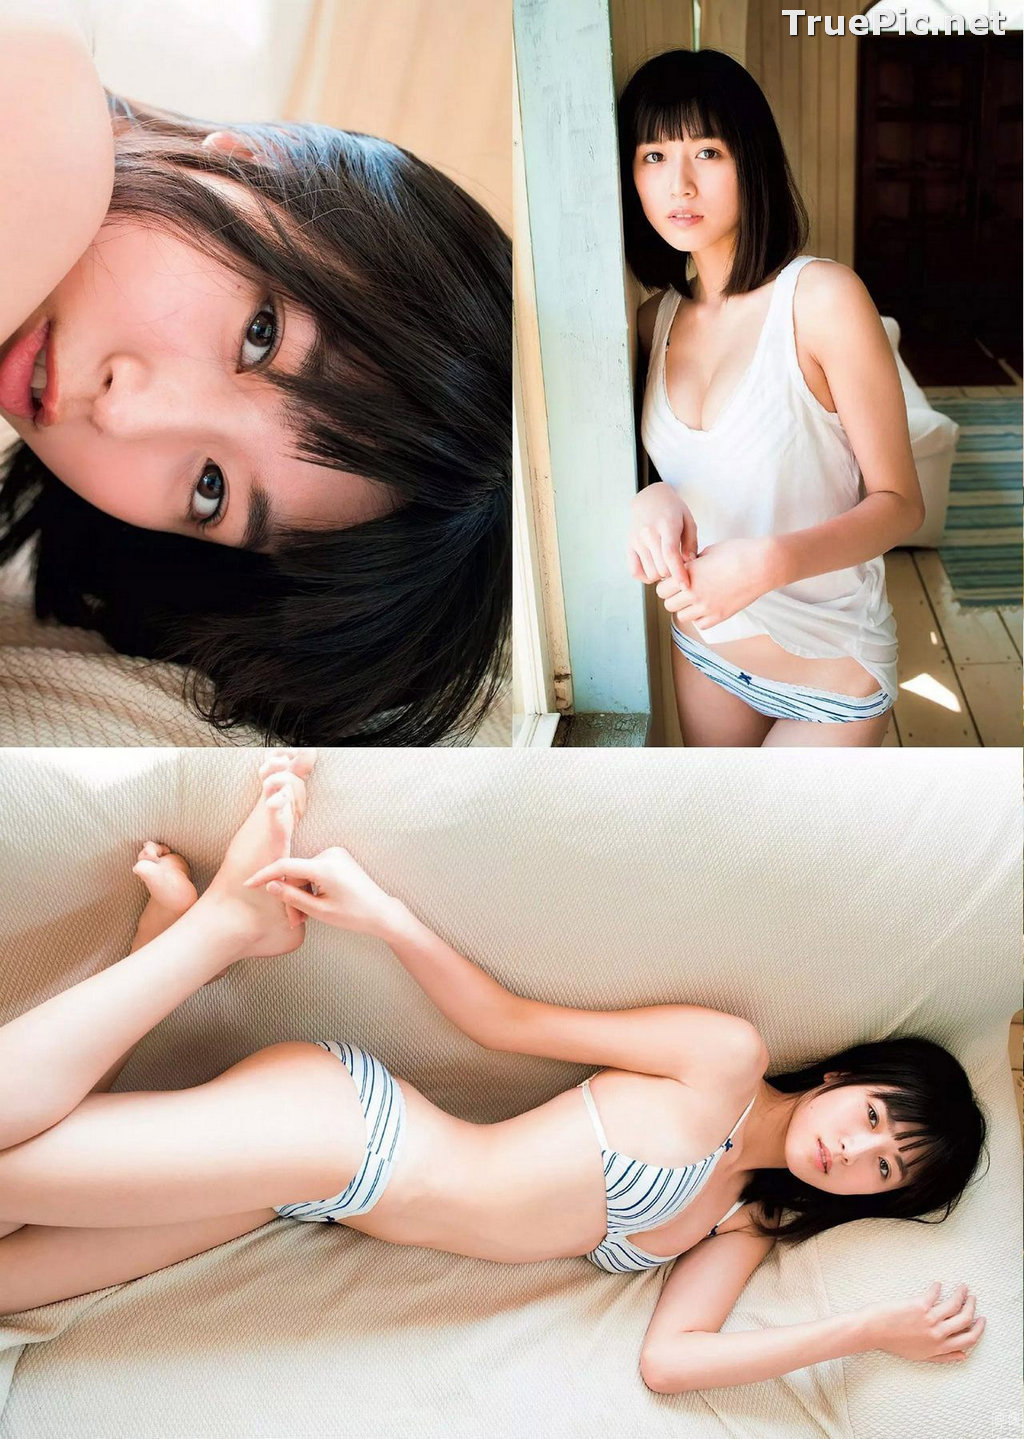 ImageJapanese Gravure Idol and Actress - Kitamuki Miyu (北向珠夕) - Sexy Picture Collection 2020 - TruePic.net - Picture-52